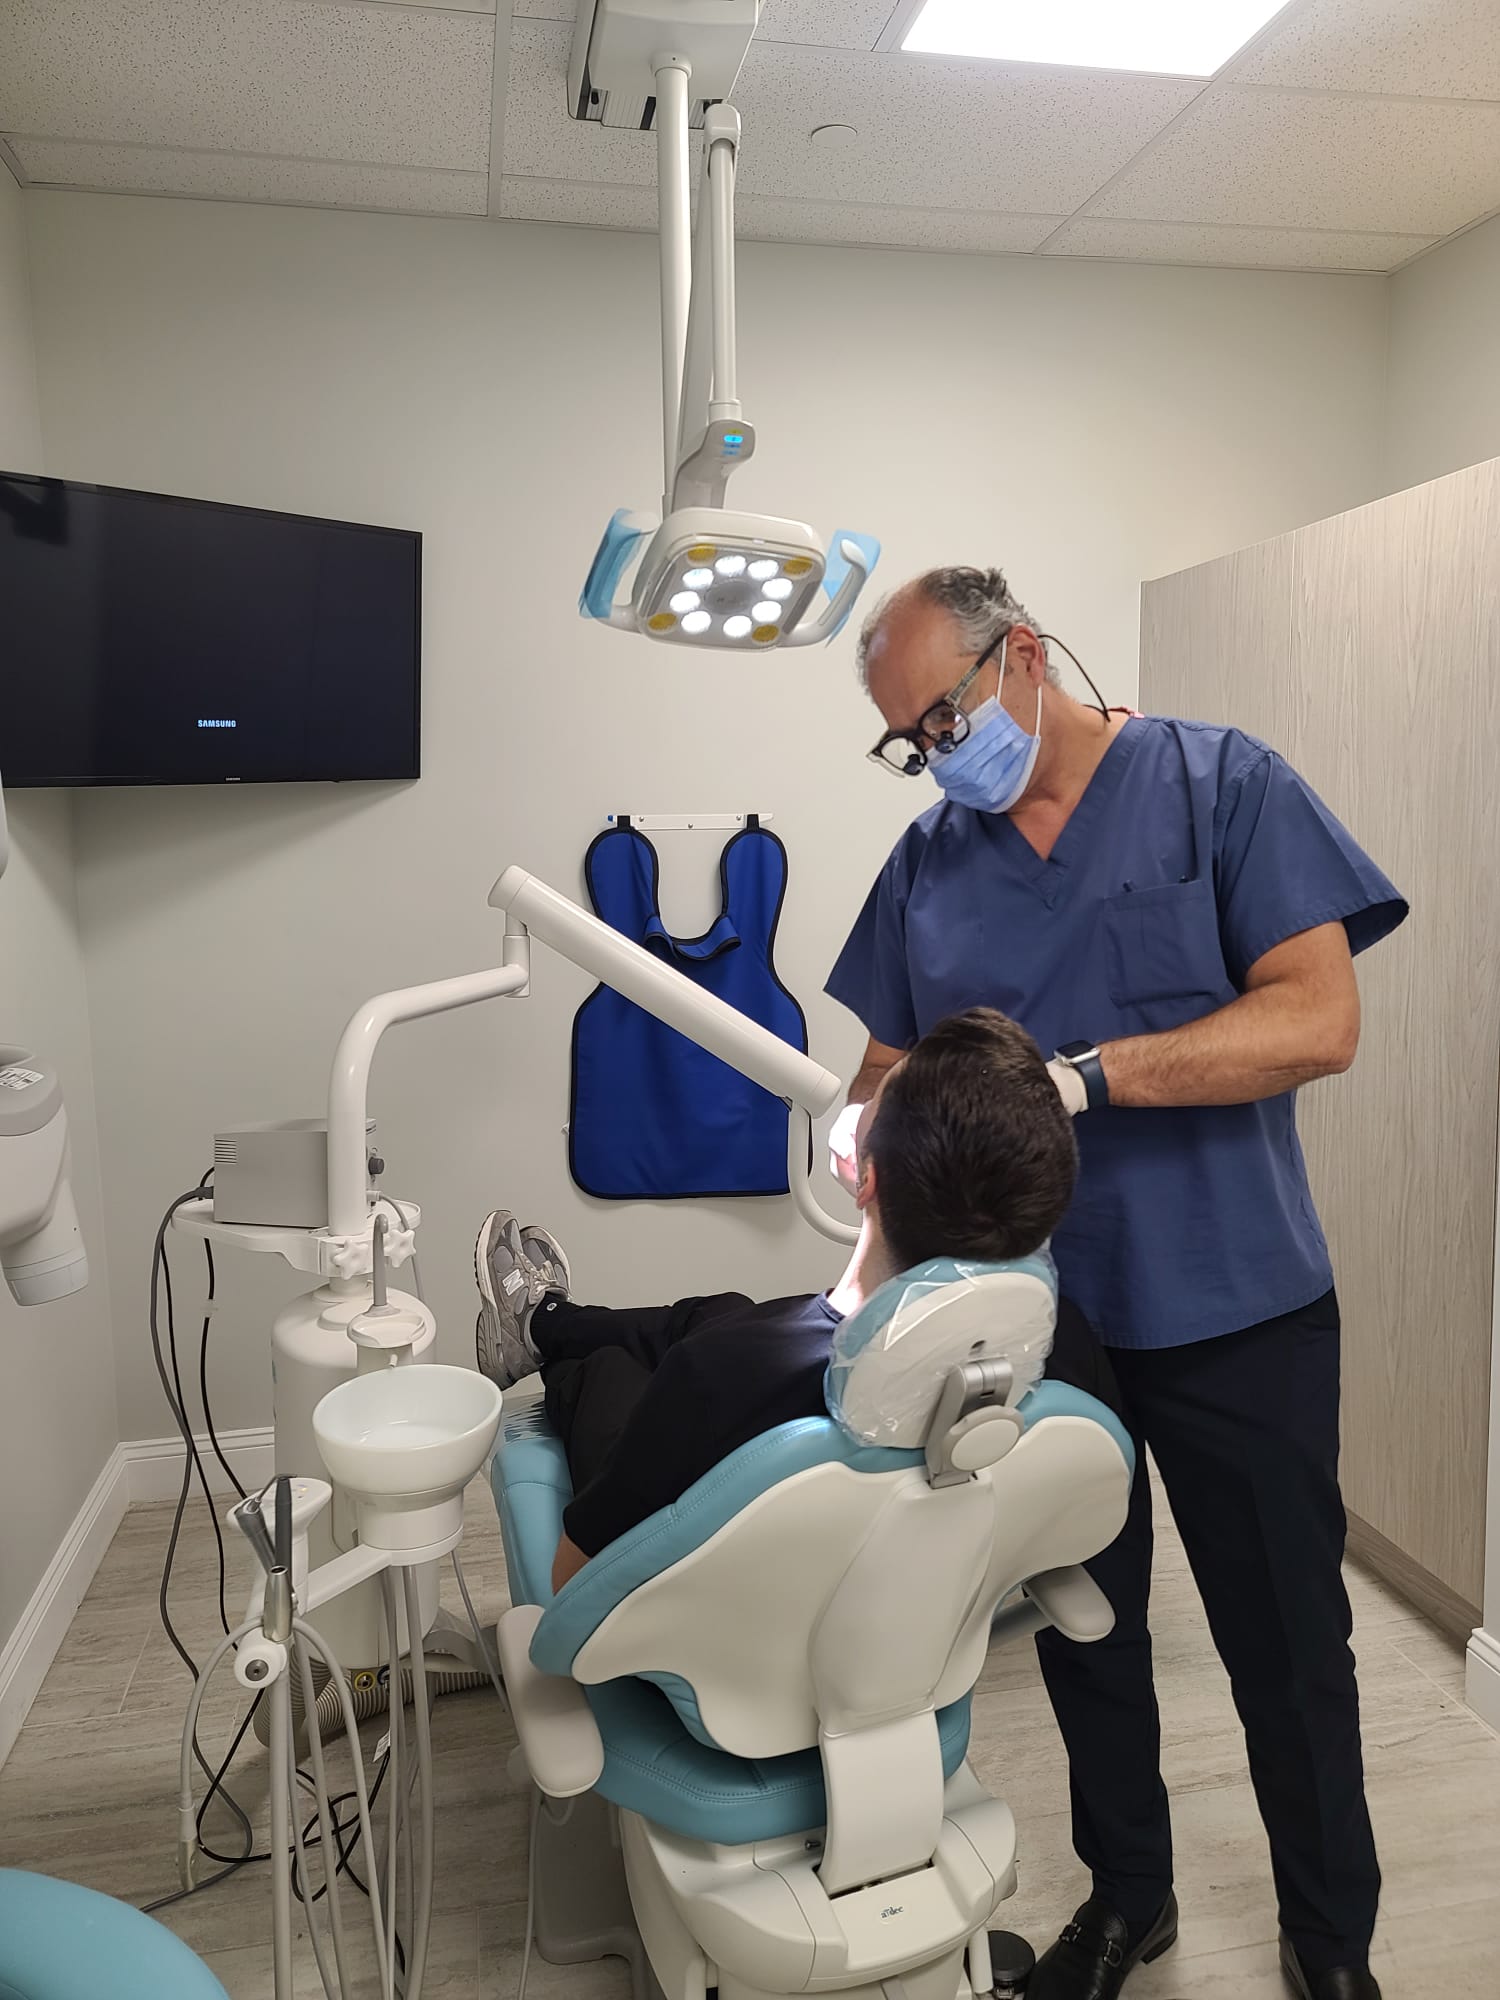 Photos of Our Business - Century Dentistry Center - Photo (165886)